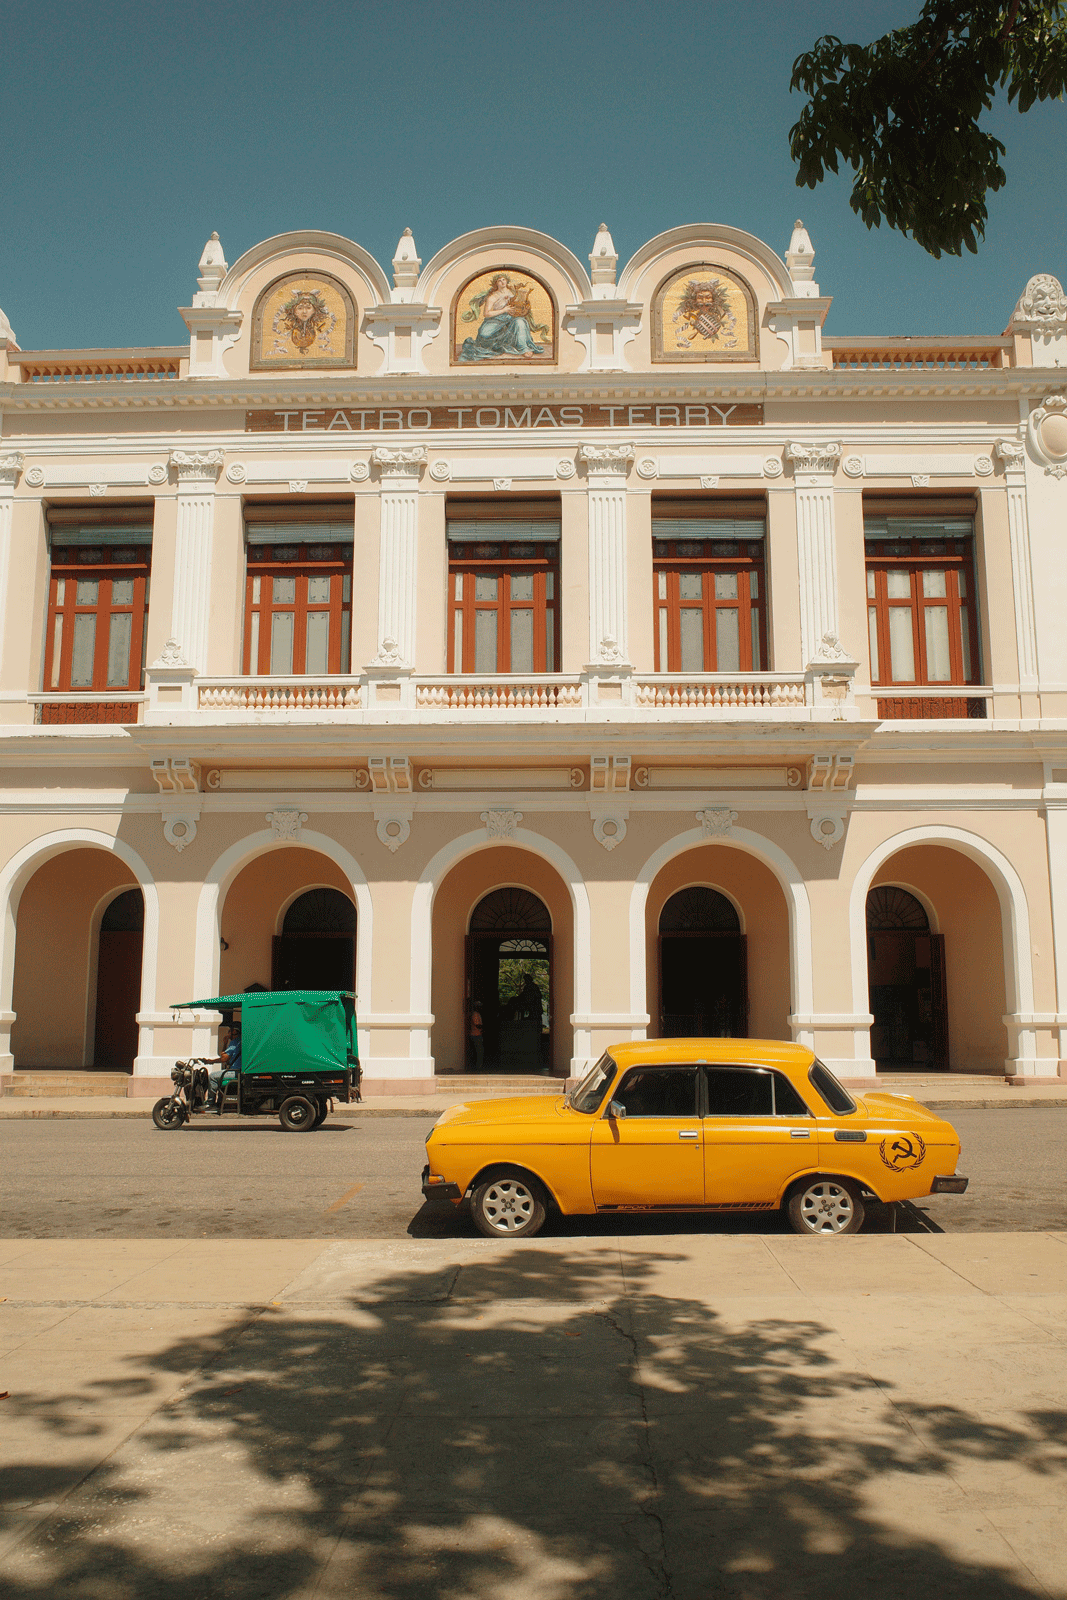 A yellow vintage car with a hammer and sickle symbol is parked in front of Teatro Tomás Terry. The building features three arches, grand columns, and ornate decorations, with three round paintings above. A green and black tuk-tuk is also parked nearby.